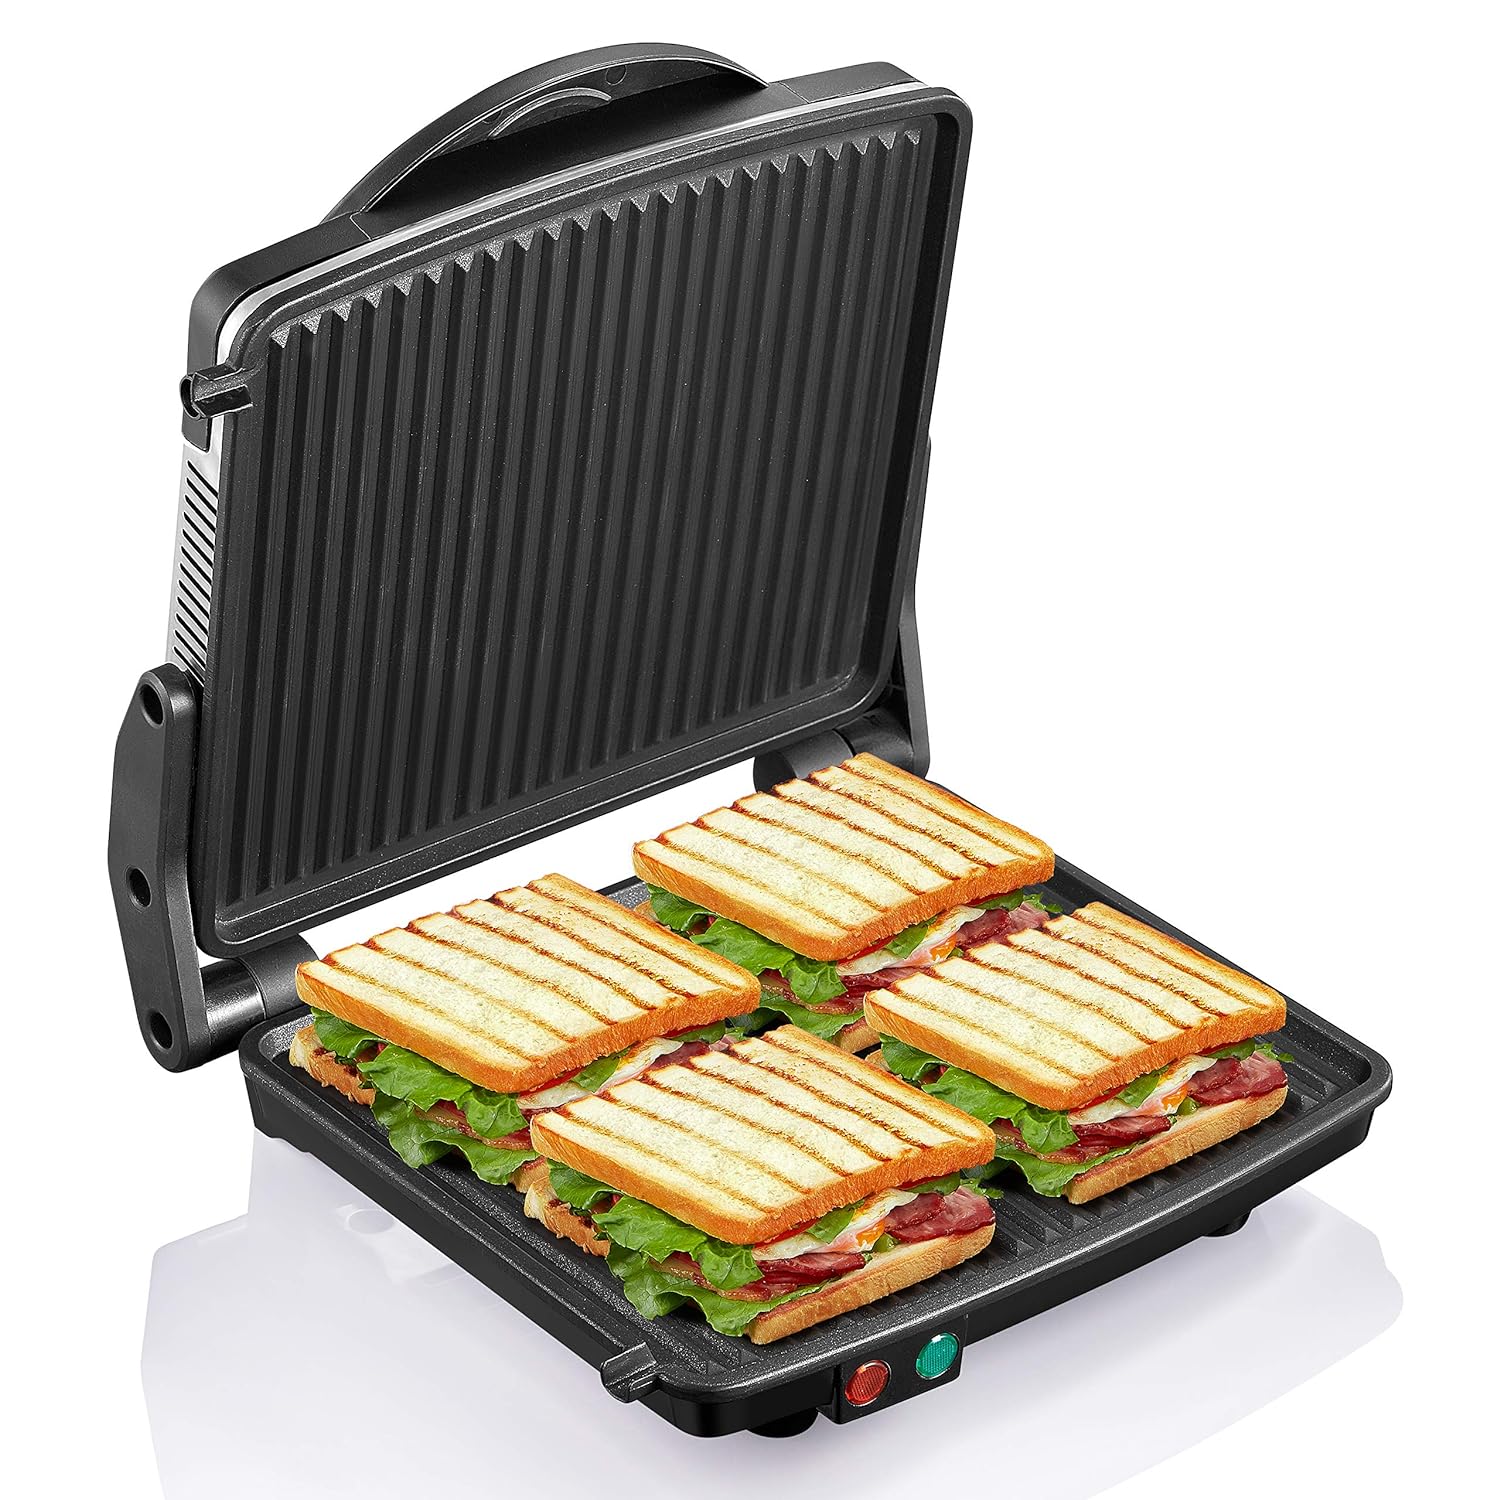 Great Choice Products Panini Press Grill, Gourmet Sandwich Maker Non-Stick Coated Plates 11" X 9.8", Opens 180 Degrees To Fit Any Type Or Size O…